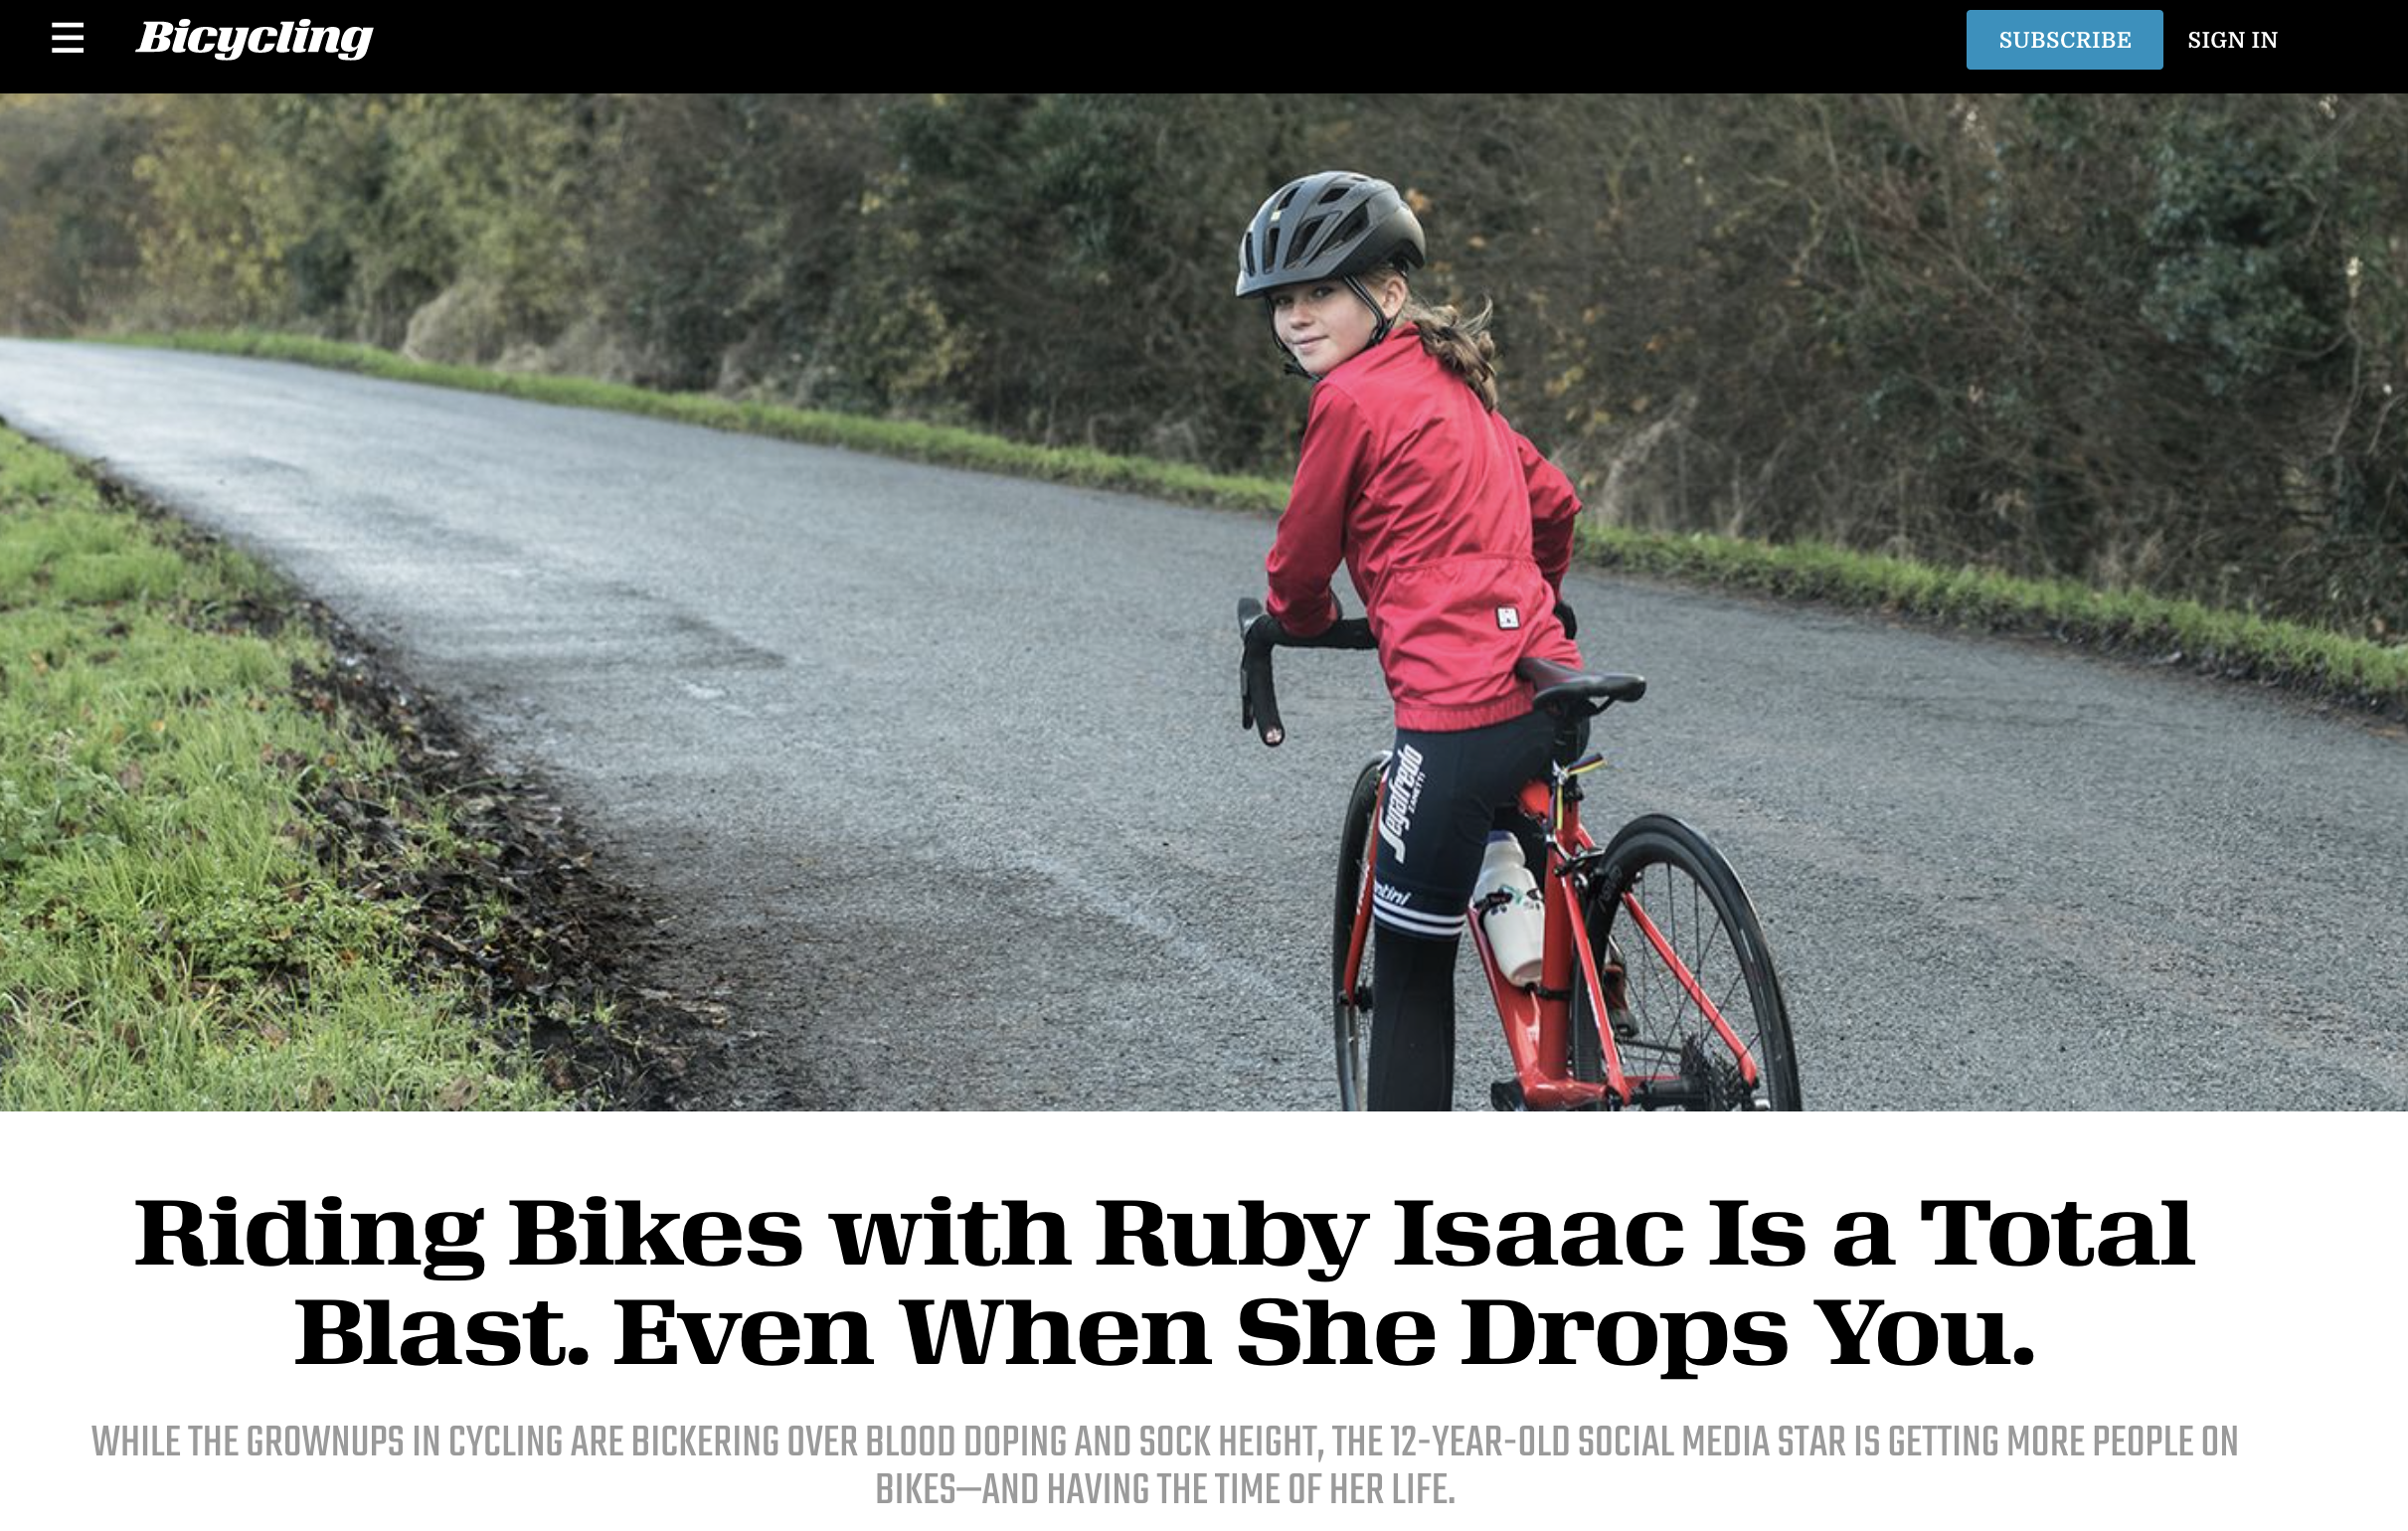 Riding Bikes with Ruby Isaac Is a Total Blast. Even When She Drops You.